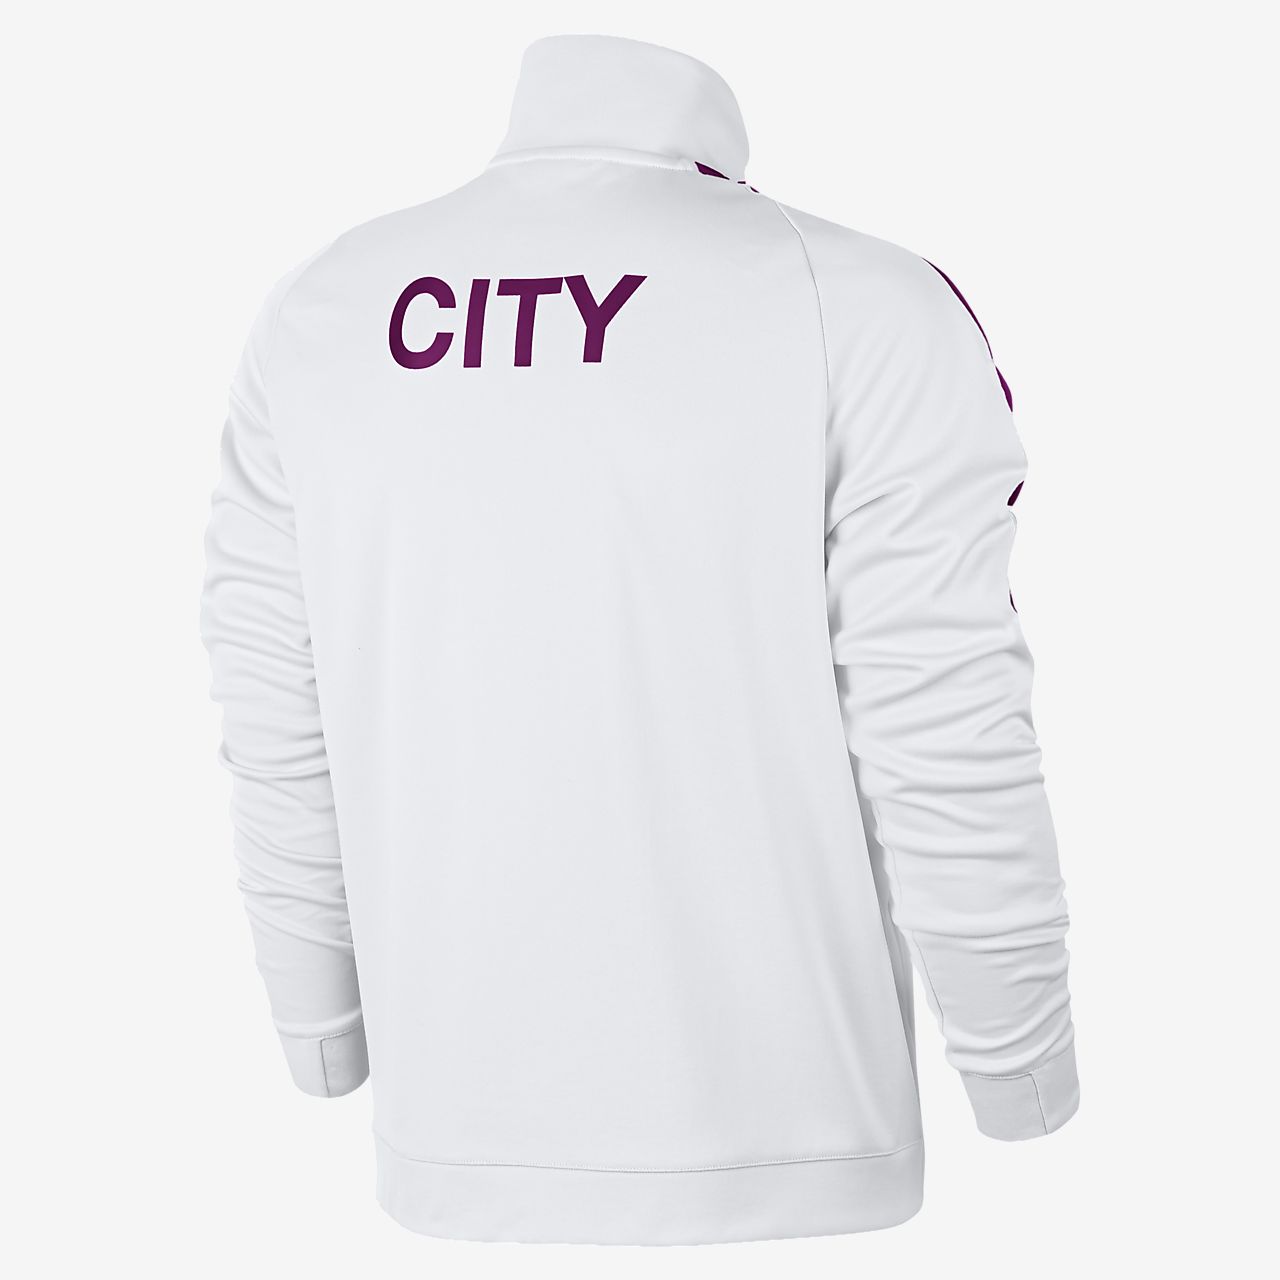 Nike Manchester City FC Football Jacket - Clothes Hoodies - Sporting ...